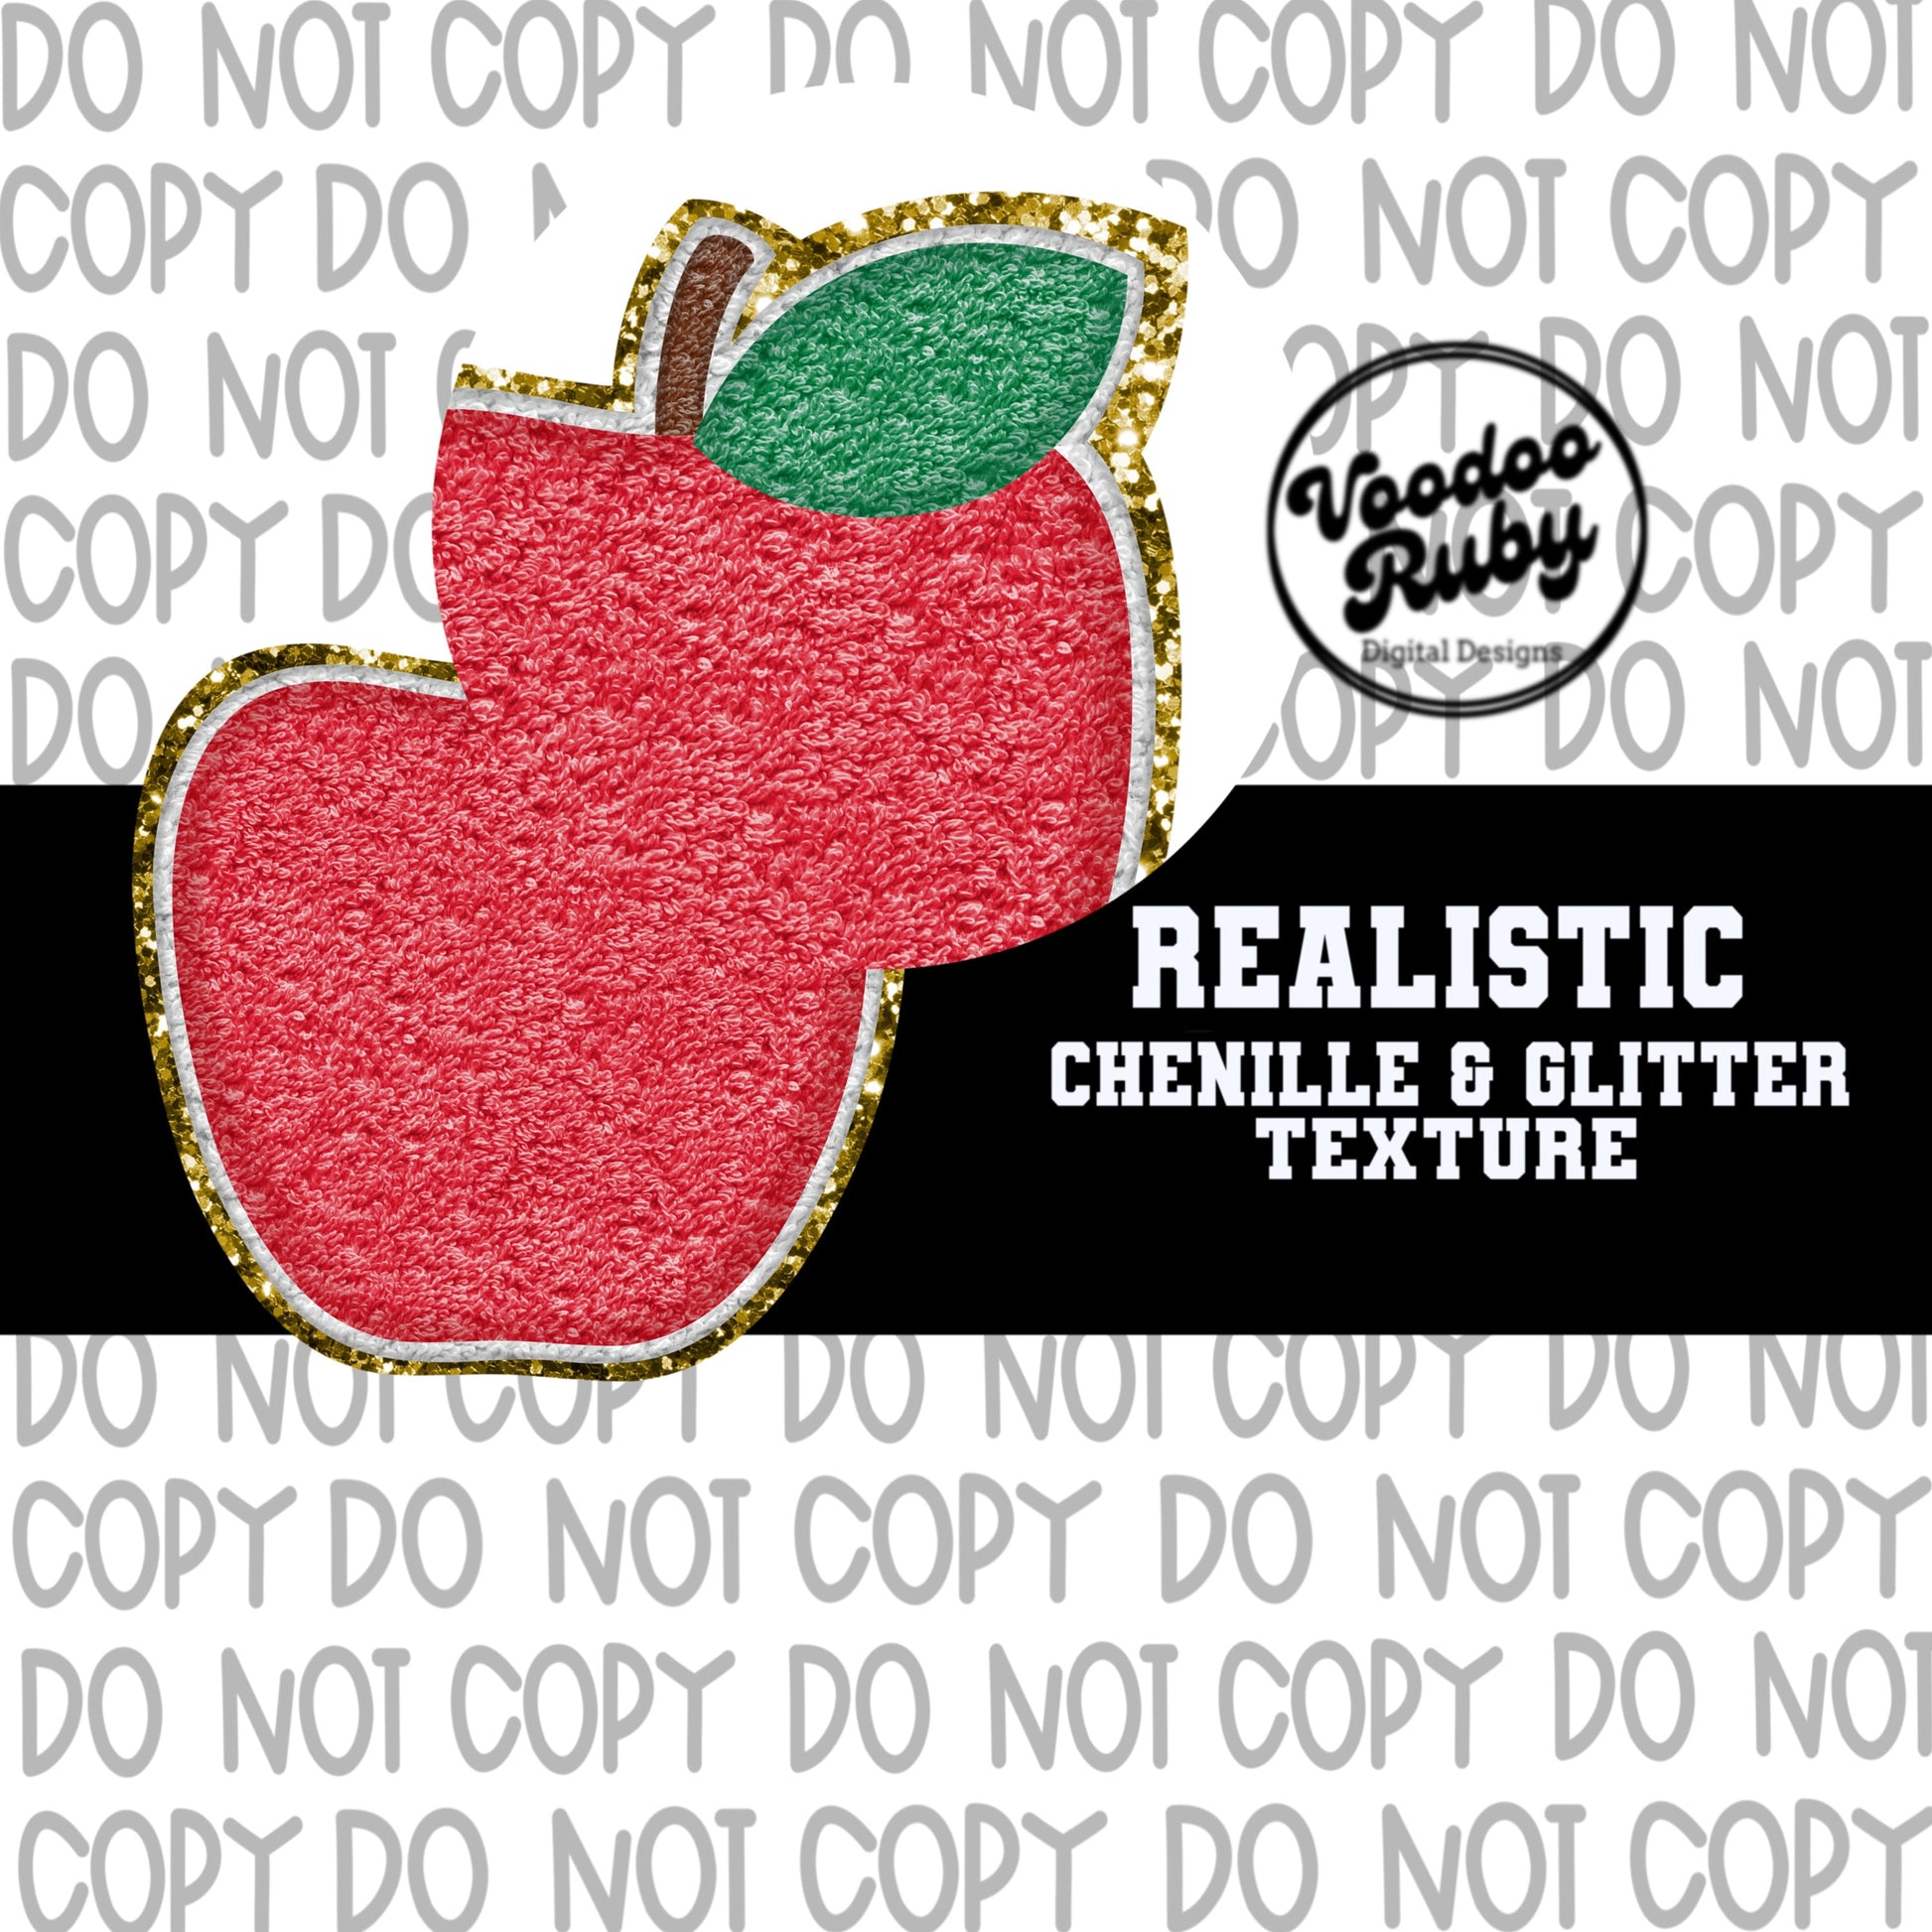 Apple PNG Faux Chenille Patch Design Hand Drawn Digital Download Sublimation Teacher png Back to School DTF Printable